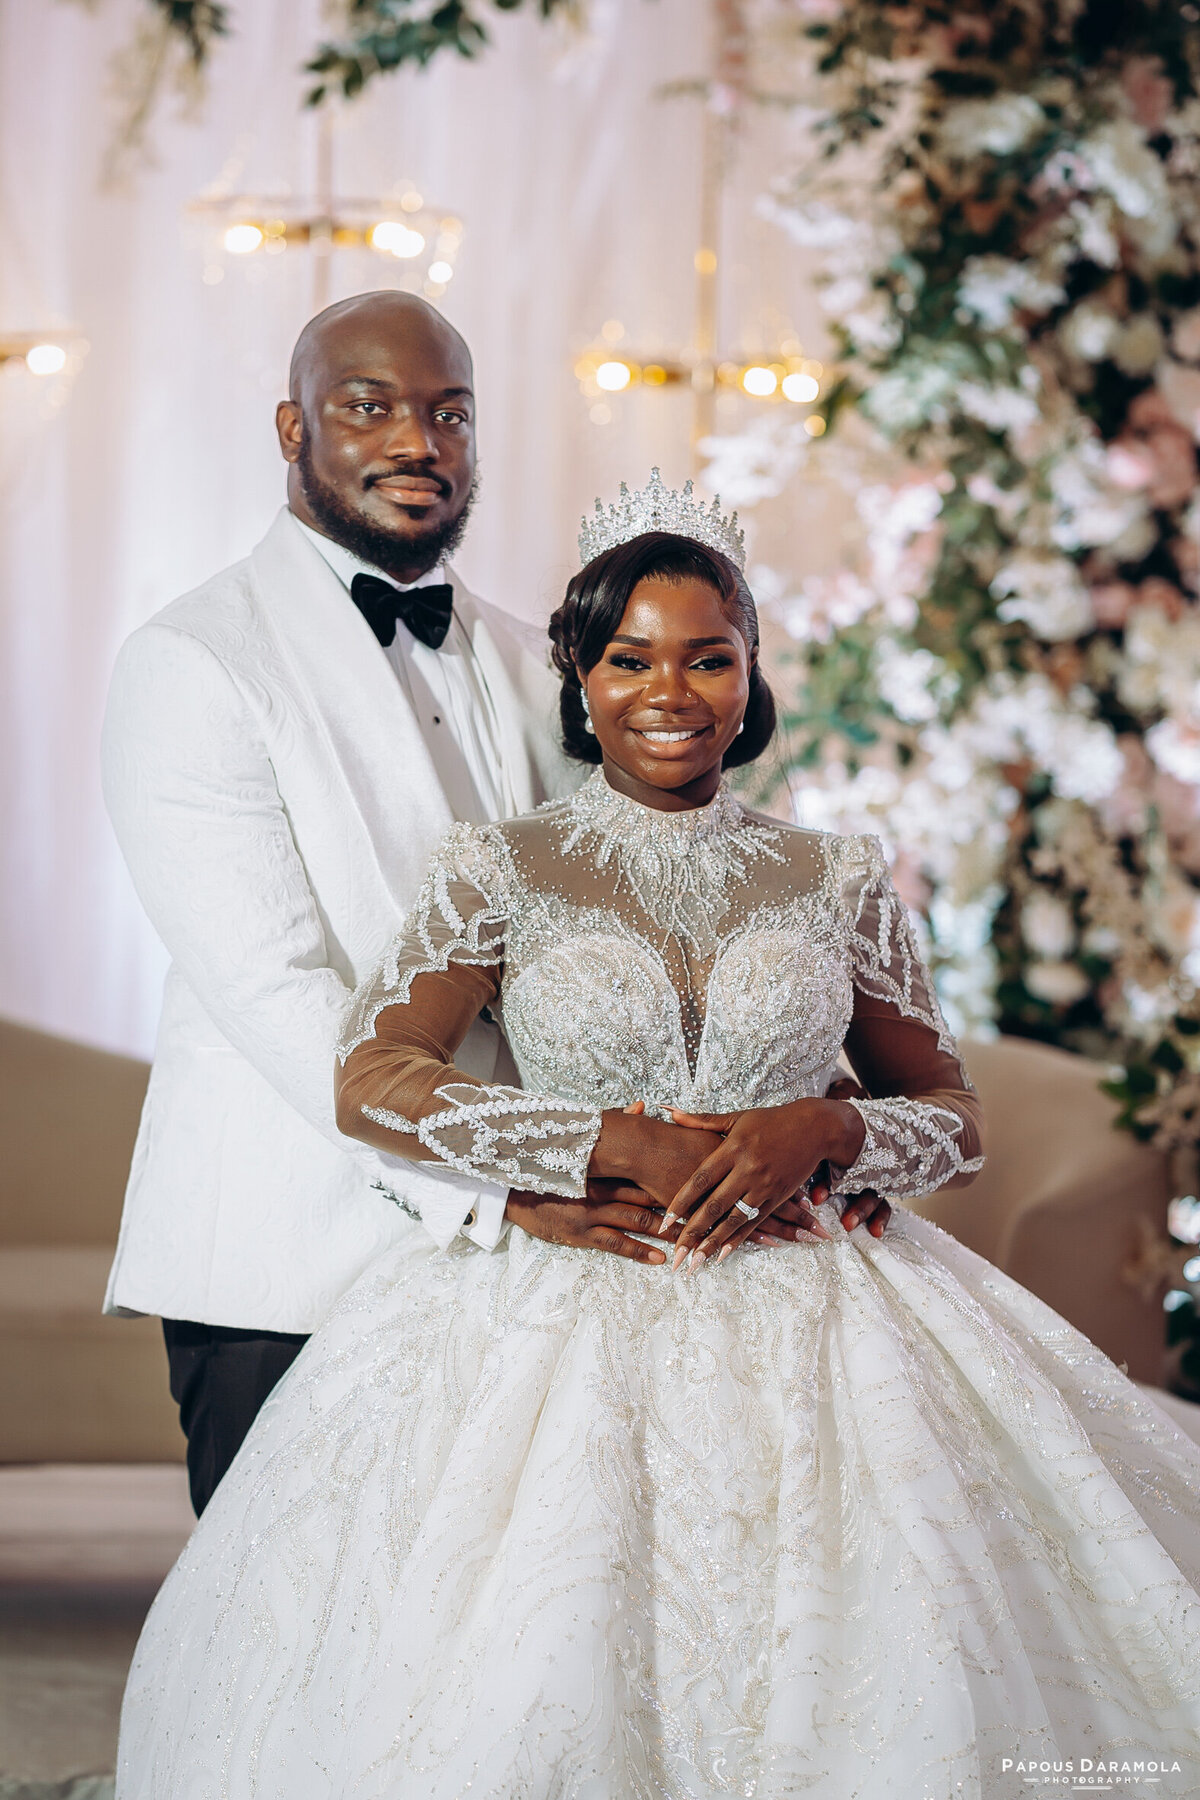 Abigail and Abije Oruka Events Papouse photographer Wedding event planners Toronto planner African Nigerian Eyitayo Dada Dara Ayoola outdoor ceremony floral princess ballgown rolls royce groom suit potraits  paradise banquet hall vaughn 207